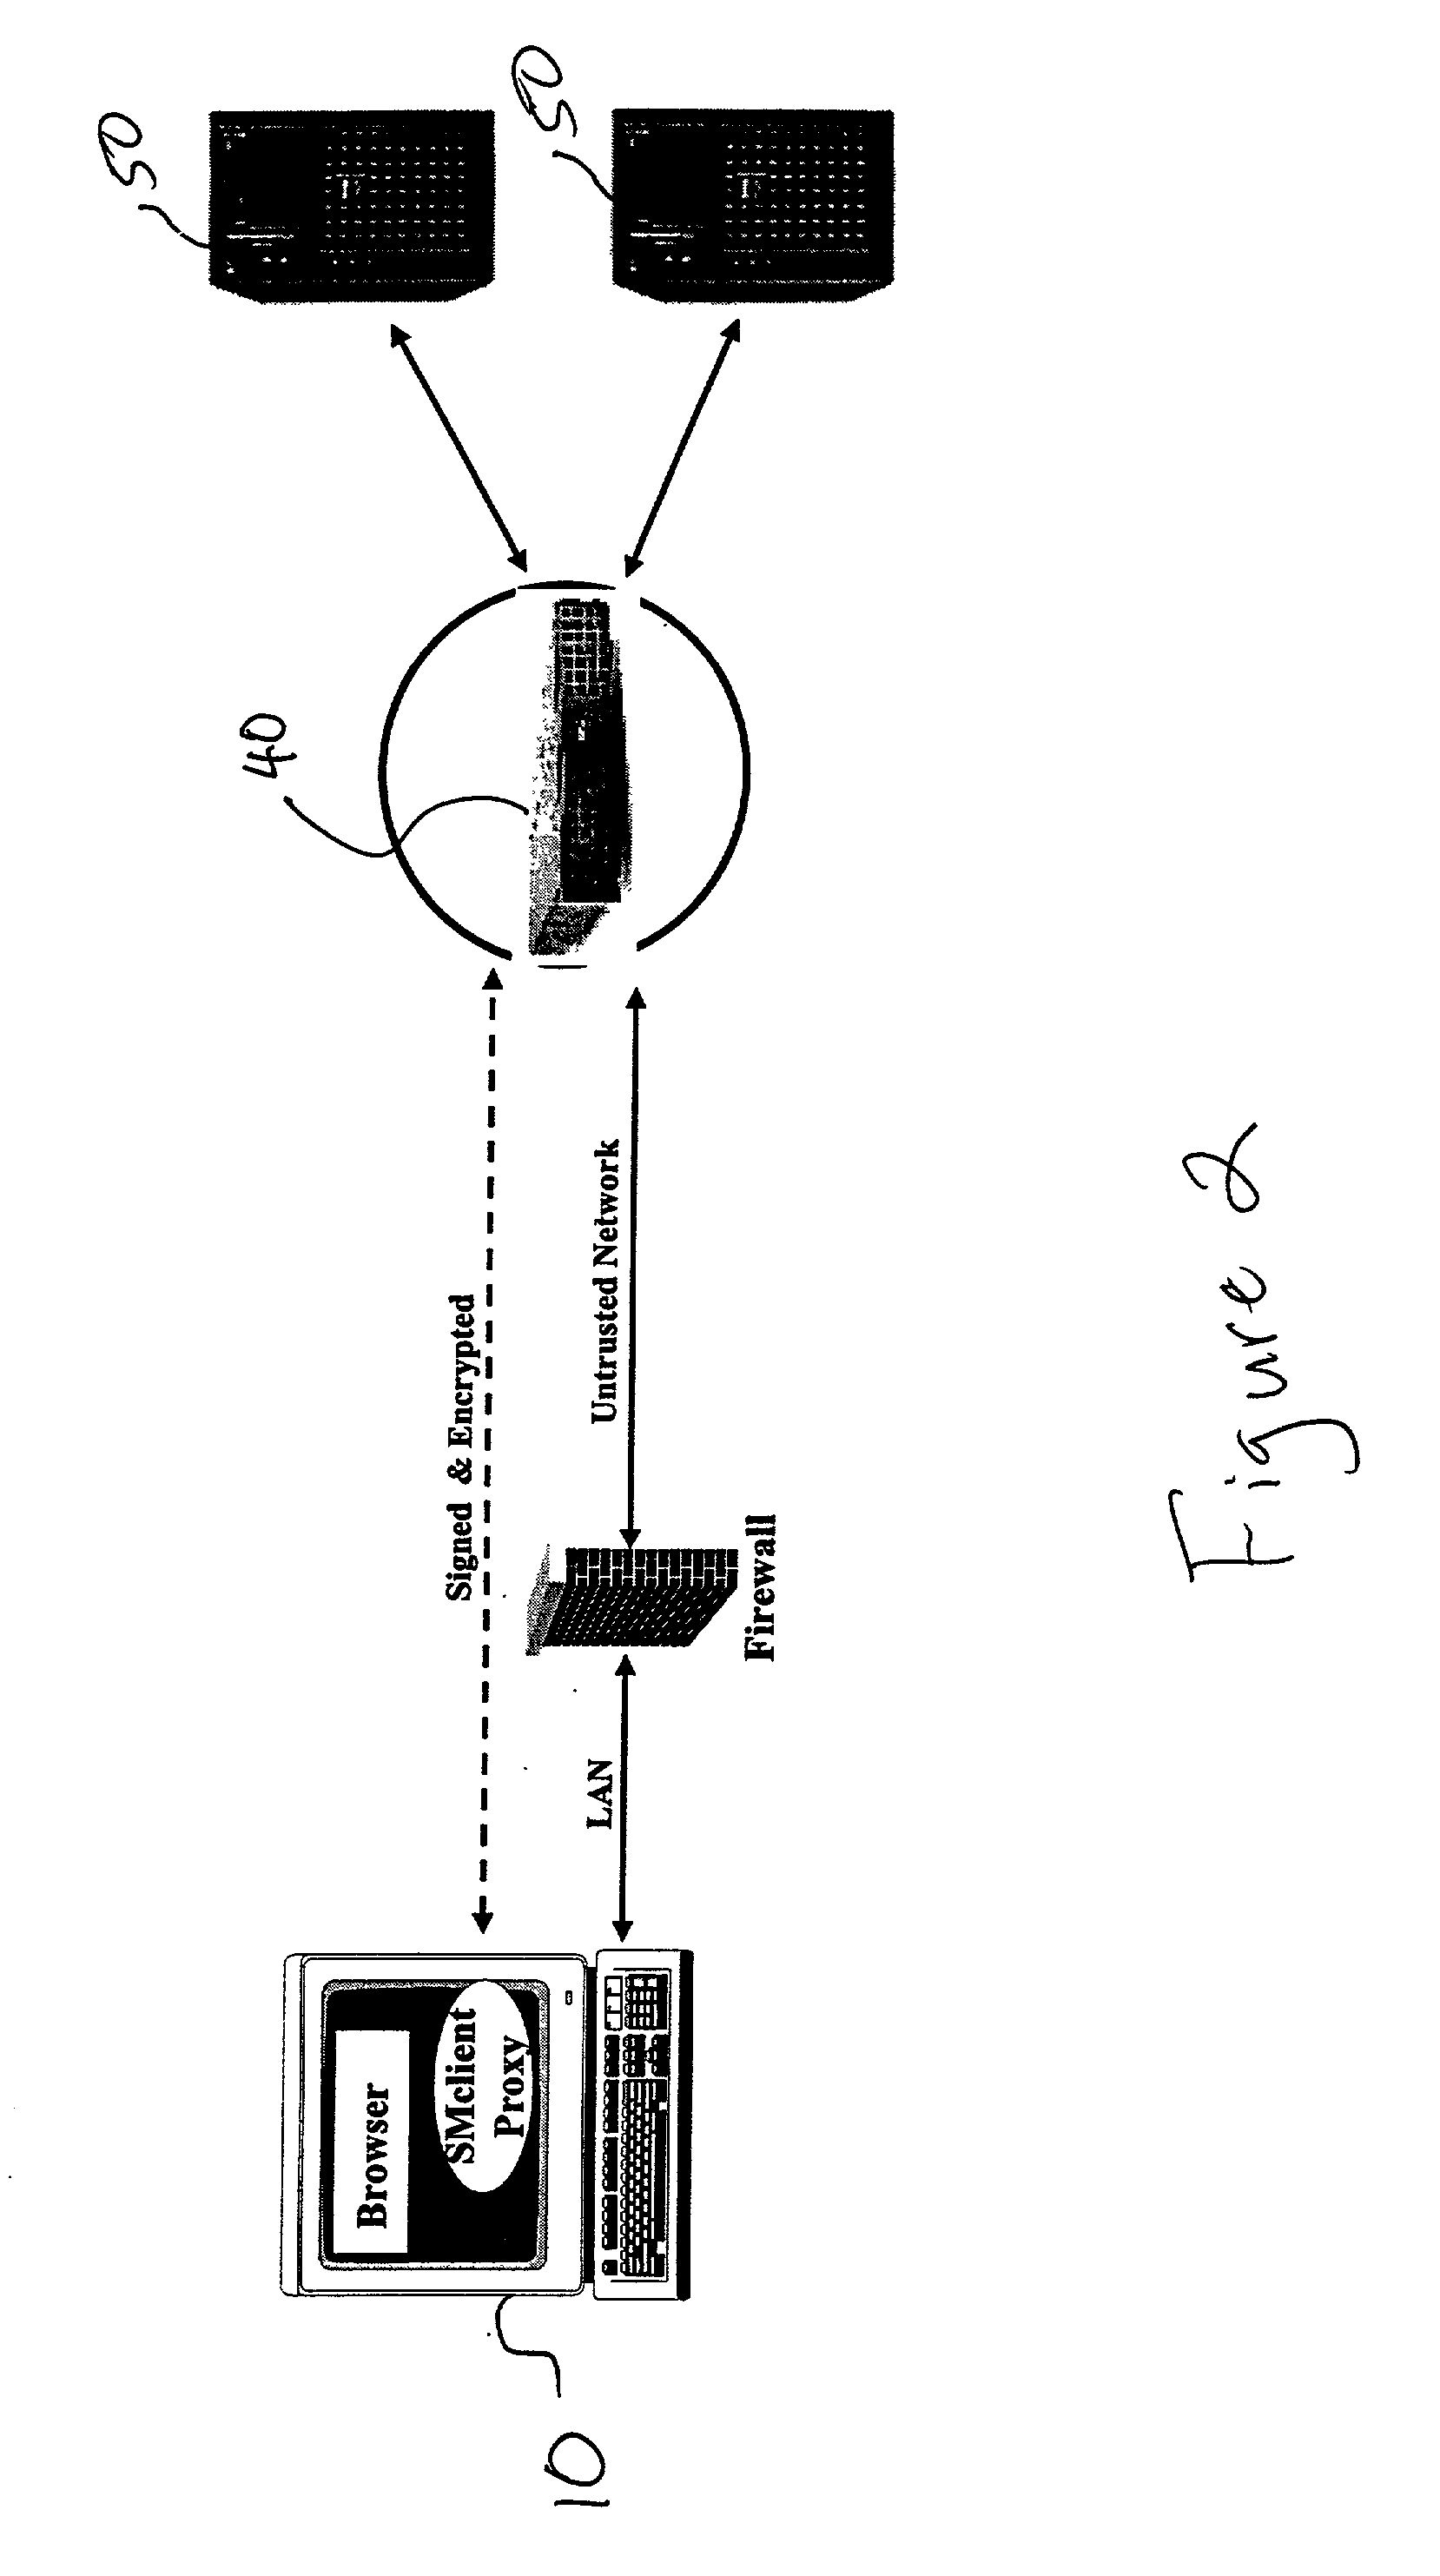 System for secure communication between domains